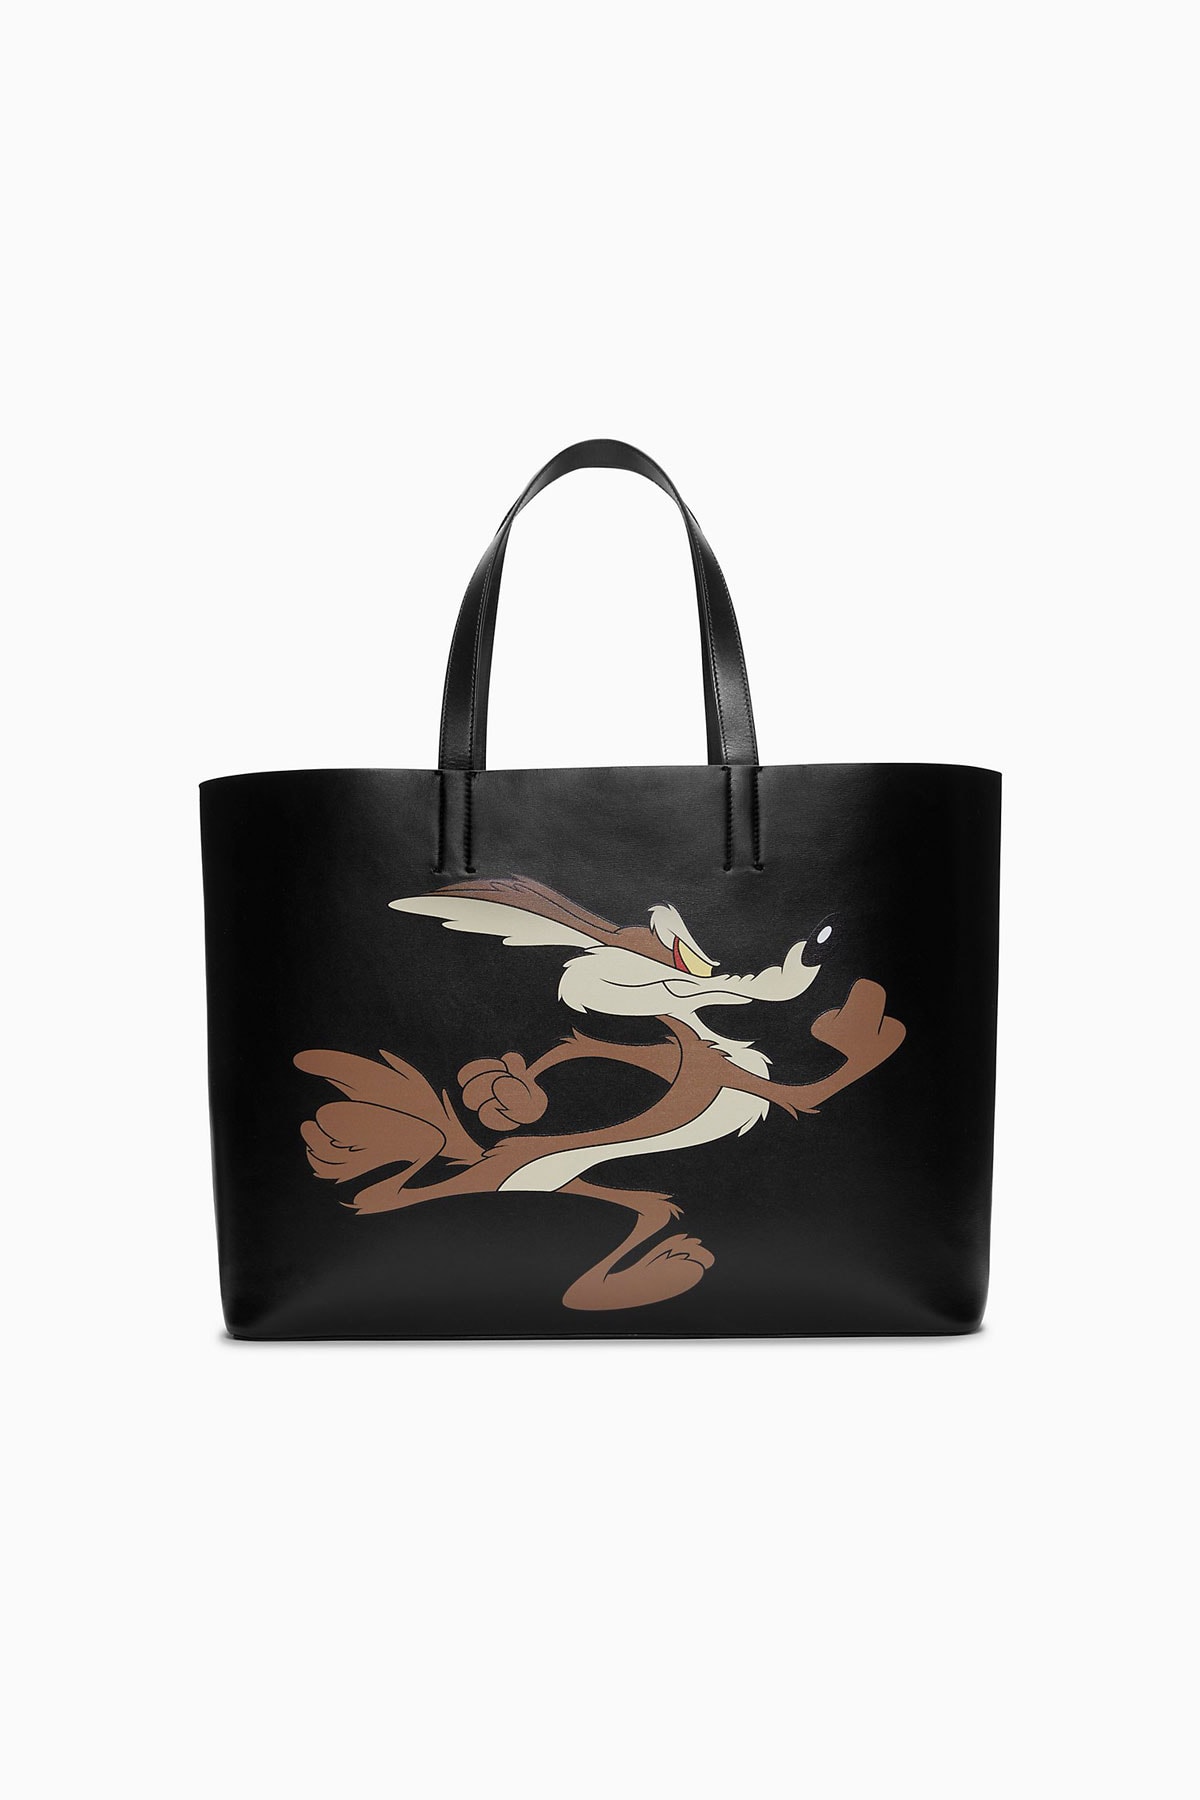 calvin klein 205w39nyc wile e coyote the roadrunner looney tunes leather bags zipper wallet card case intarsia reverse knit sweater collaboration black cream blue fall winter 2018 drop release date pre order buy sale shop sell